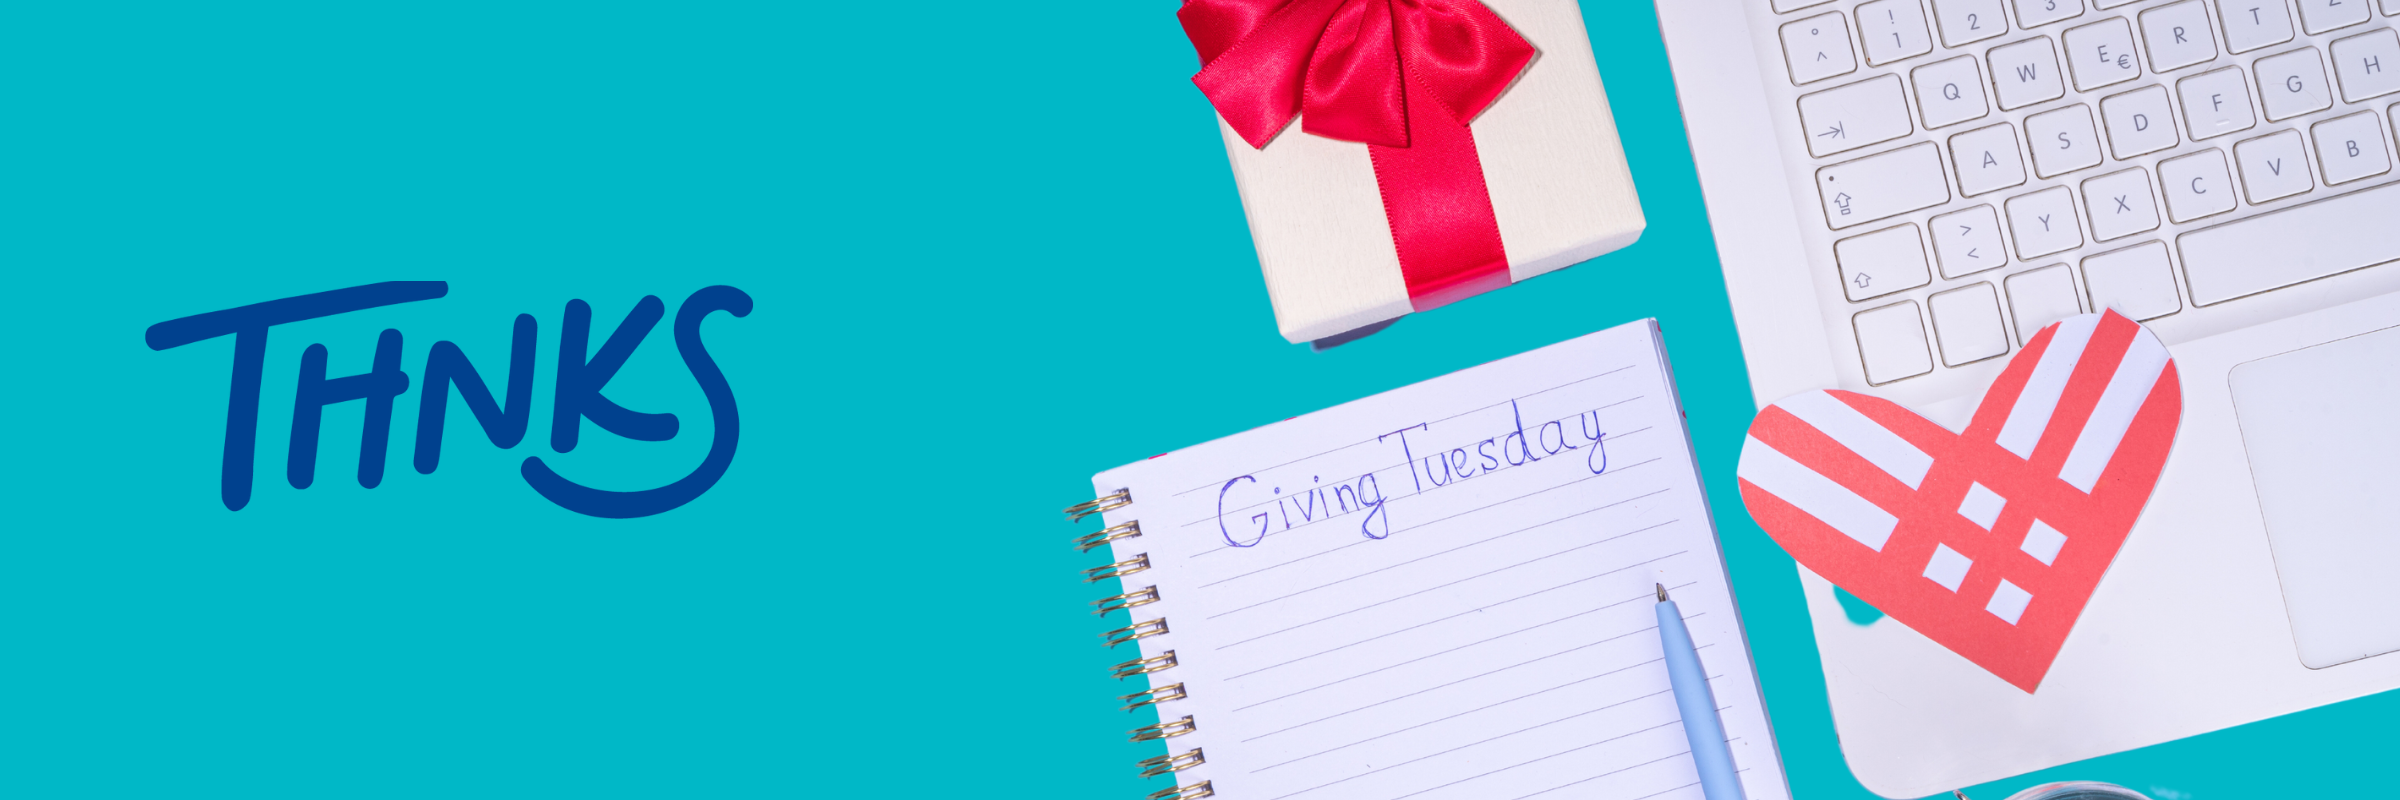 Why Giving Tuesday Matters: How Your Donation Can Make a Difference